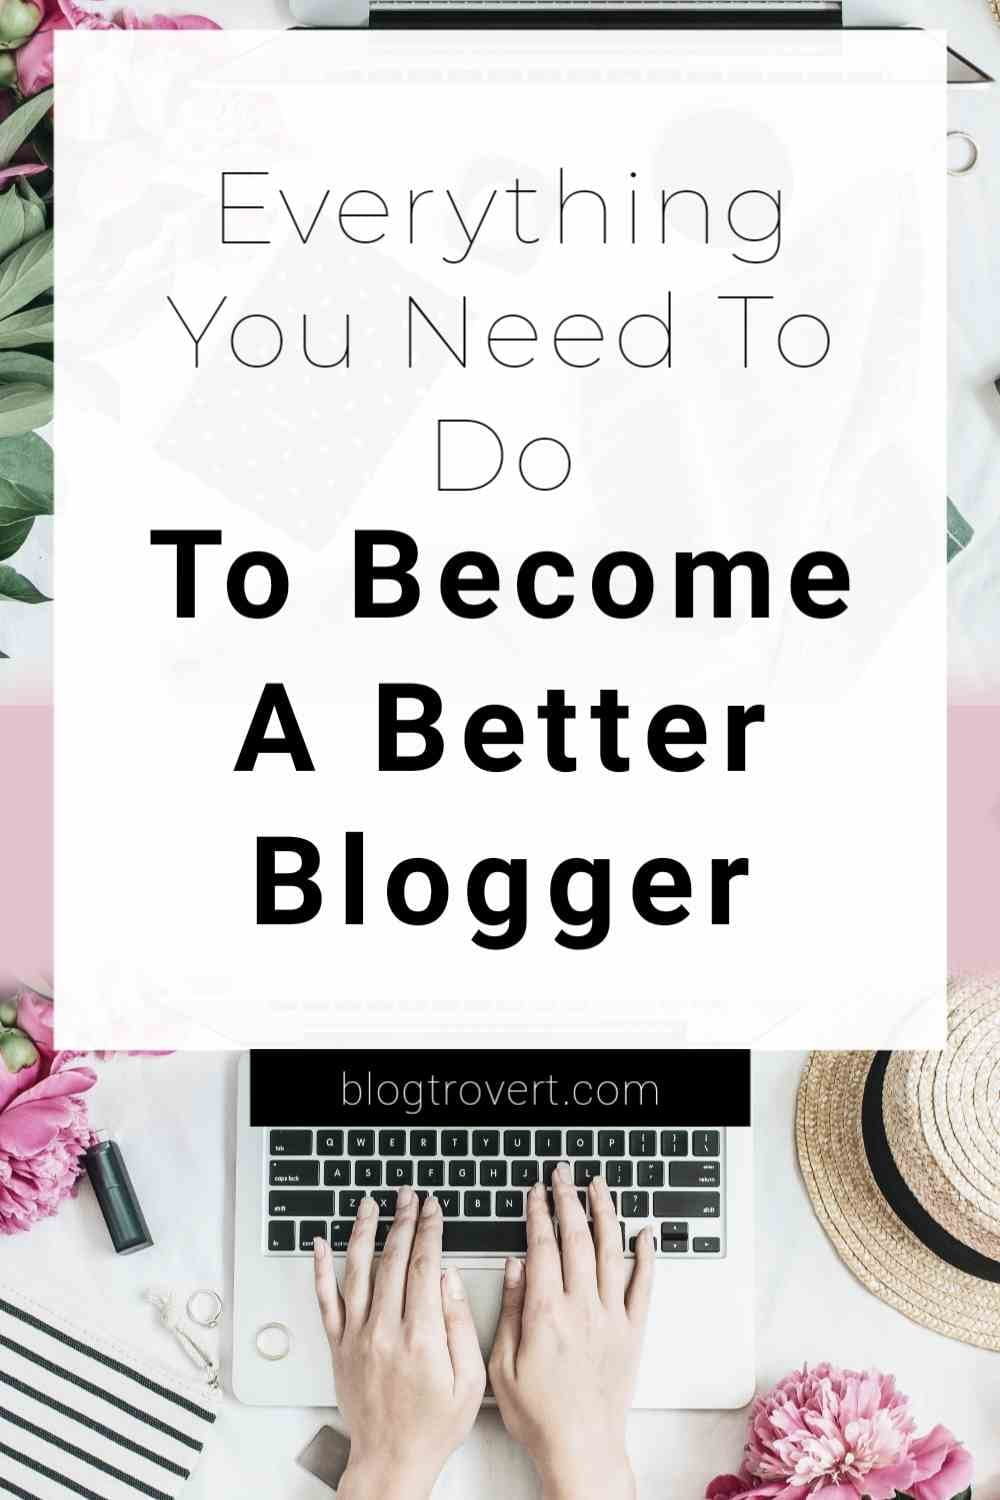 How To Become a Better Blogger - 13 helpful guides for Amateur bloggers 1